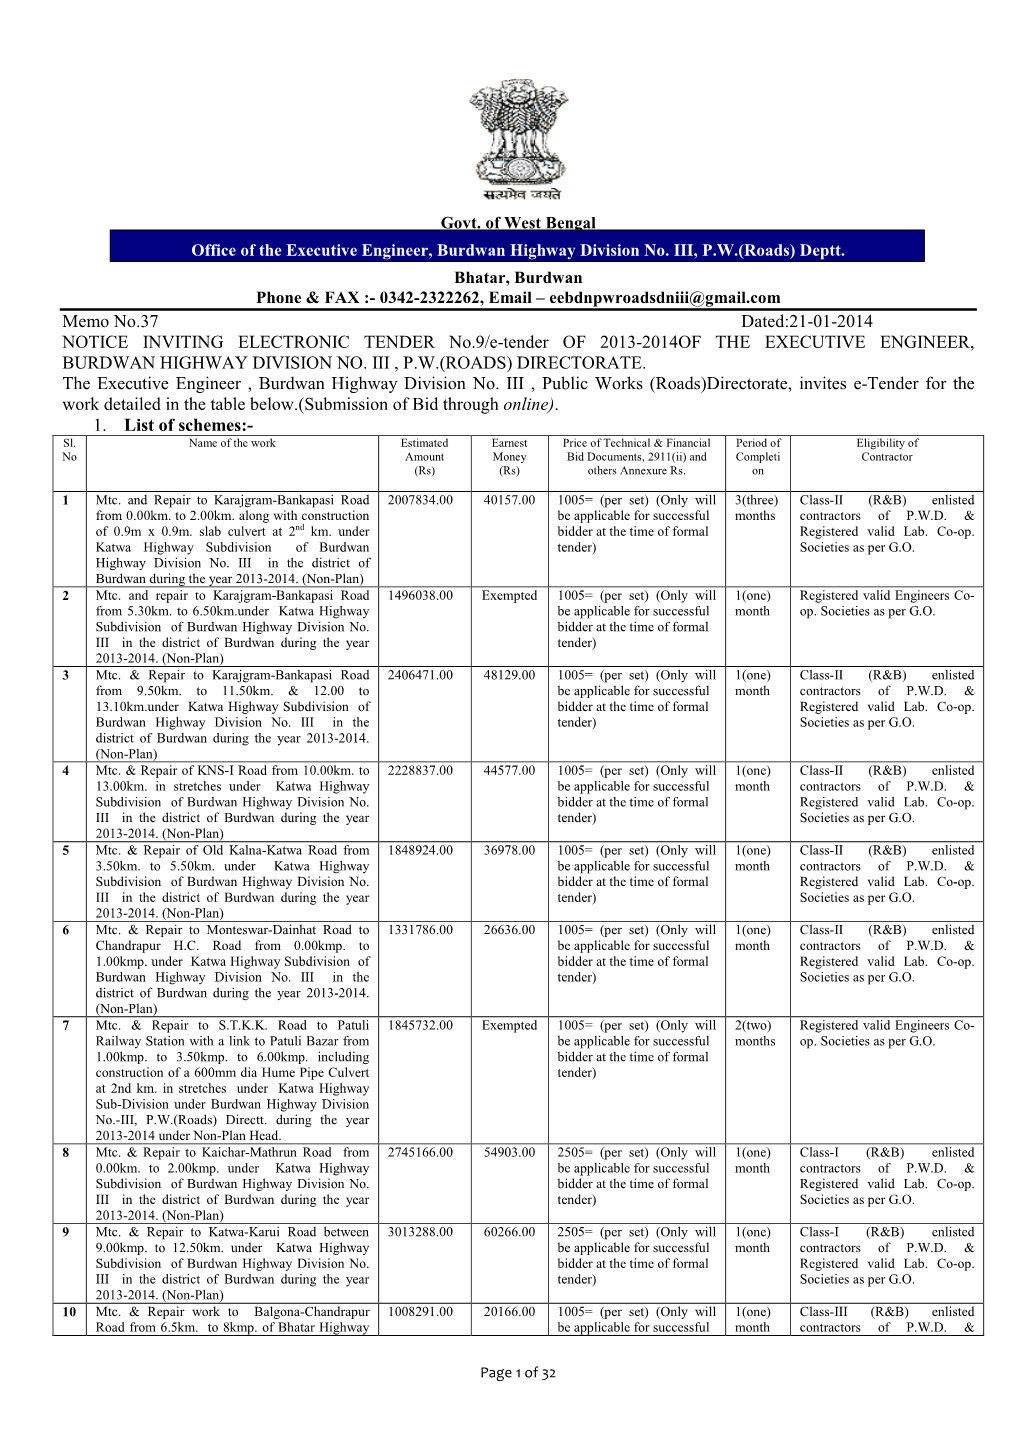 Memo No.37 Dated:21-01-2014 NOTICE INVITING ELECTRONIC TENDER No.9/E-Tender of 2013-2014OF the EXECUTIVE ENGINEER, BURDWAN HIGHWAY DIVISION NO